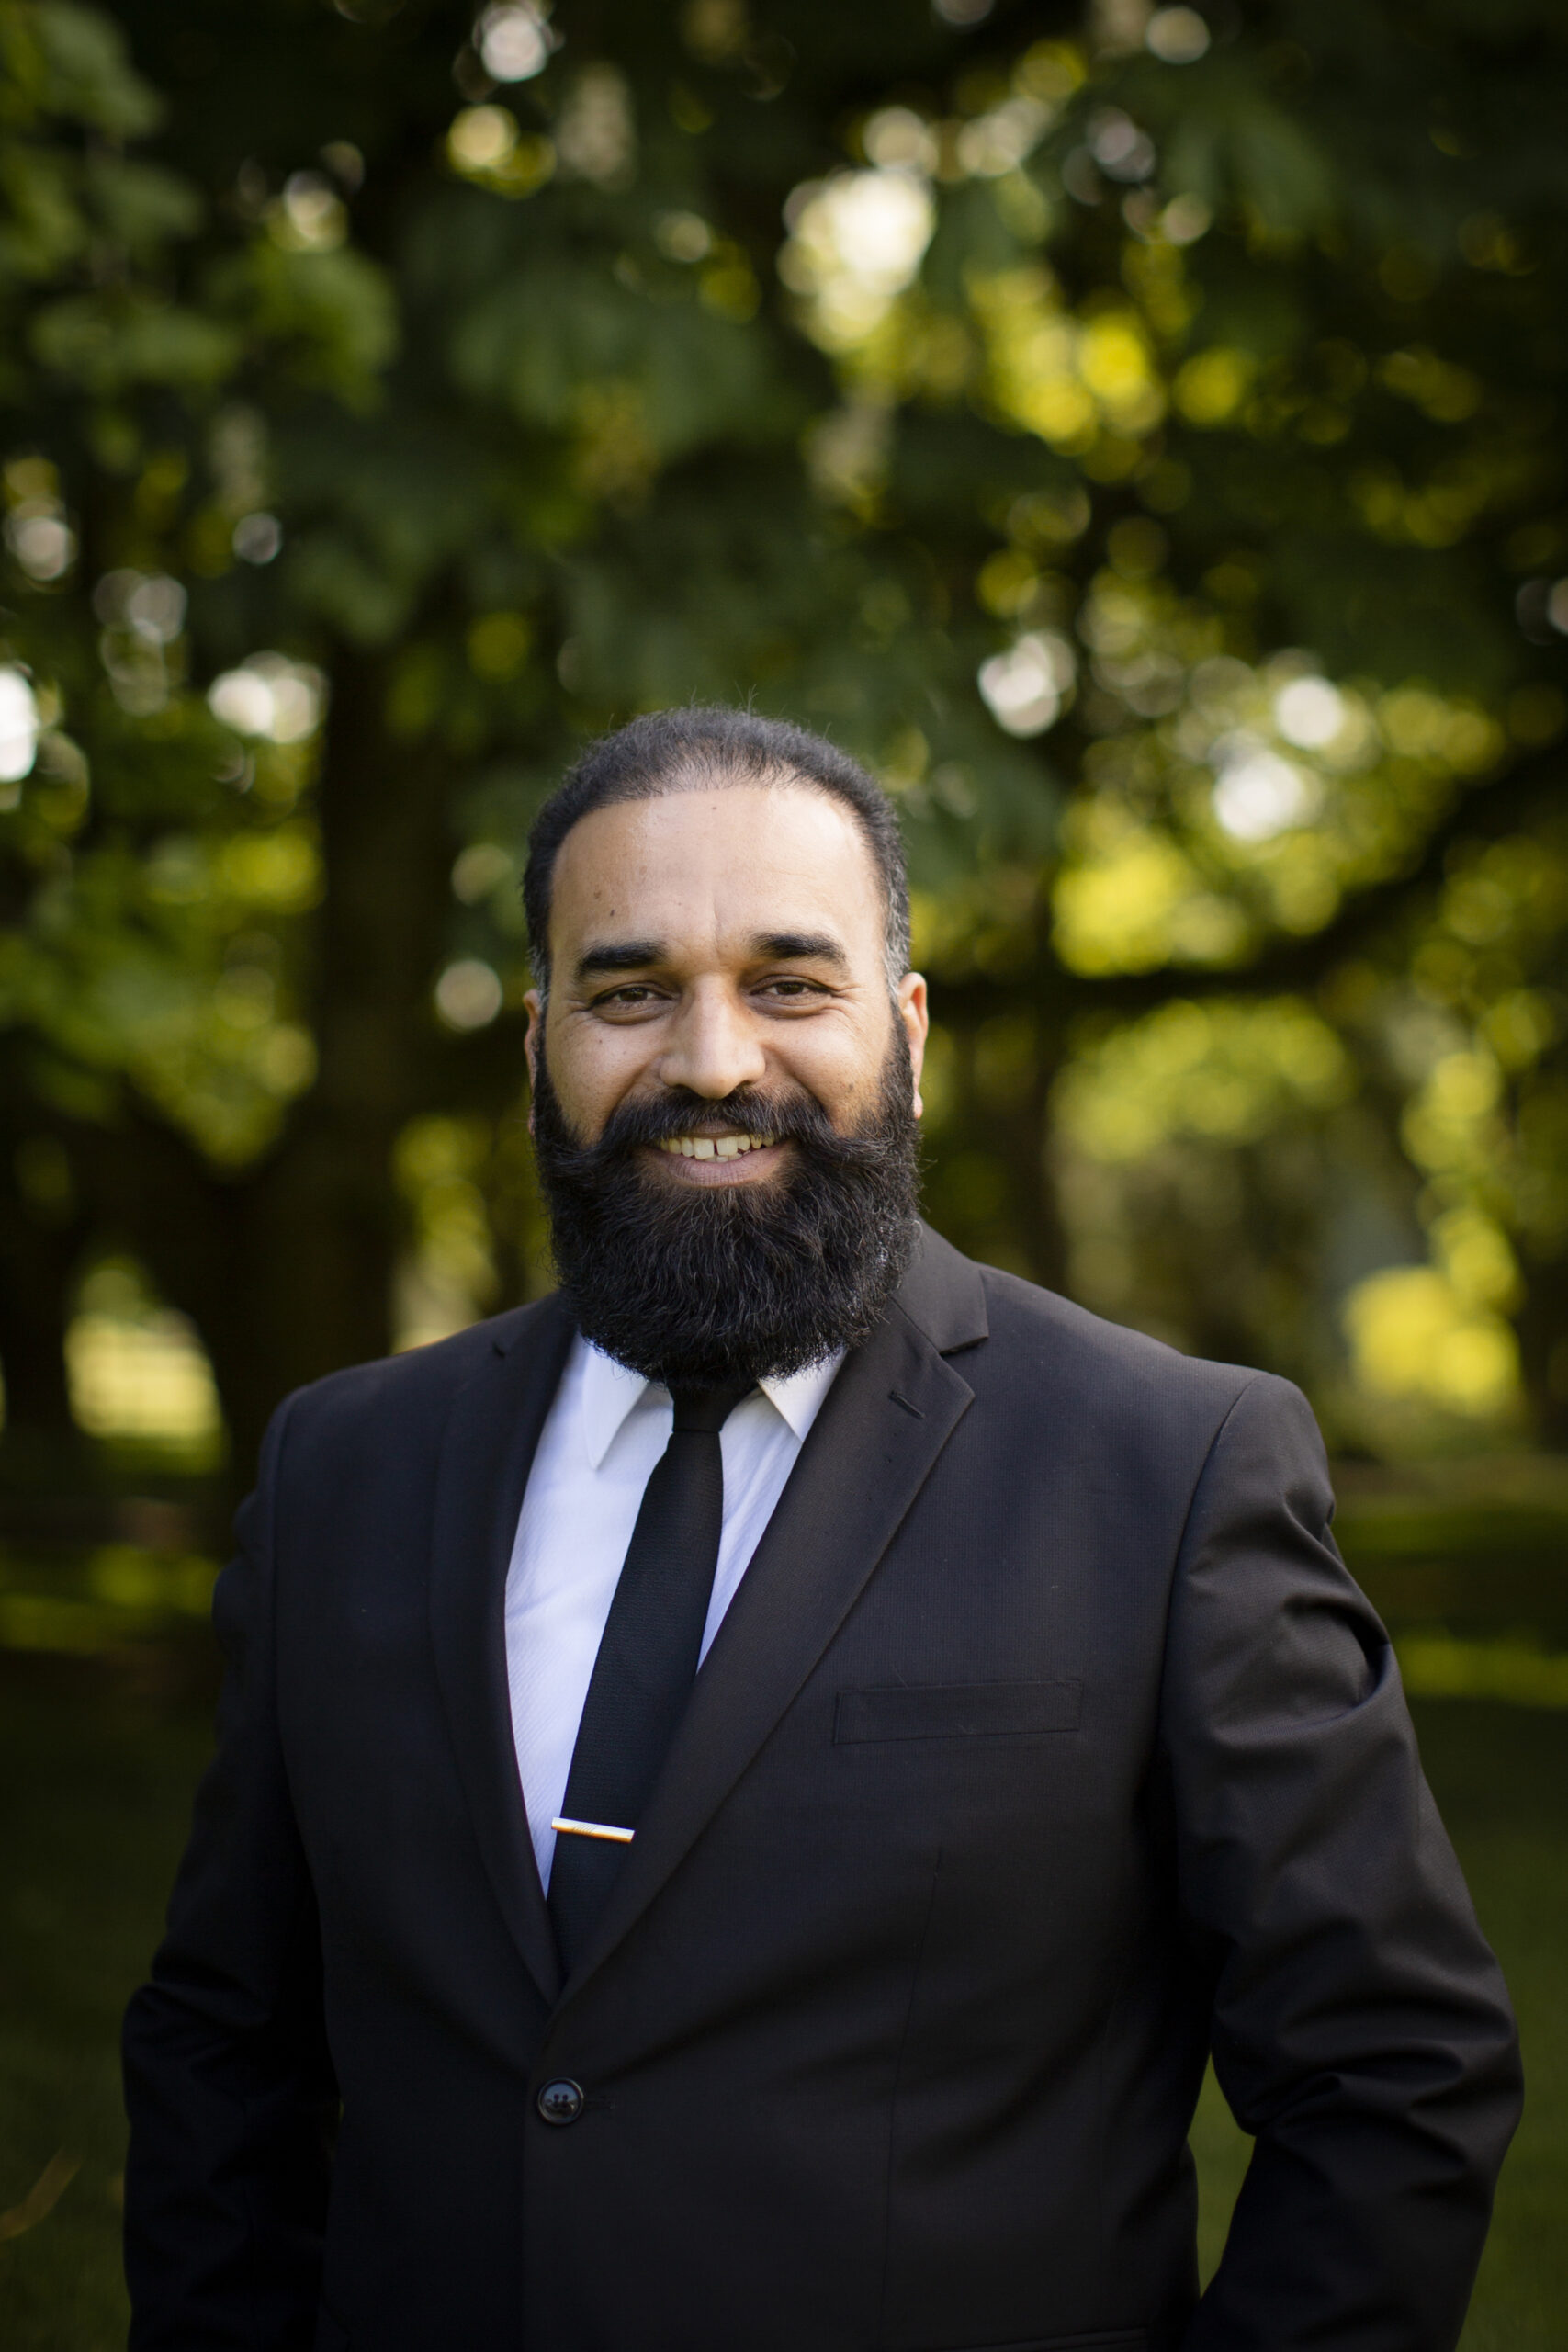 NZ Business Connect Introduces Jujhar Singh Randhawa – An Inspiration For Community Contribution And Business